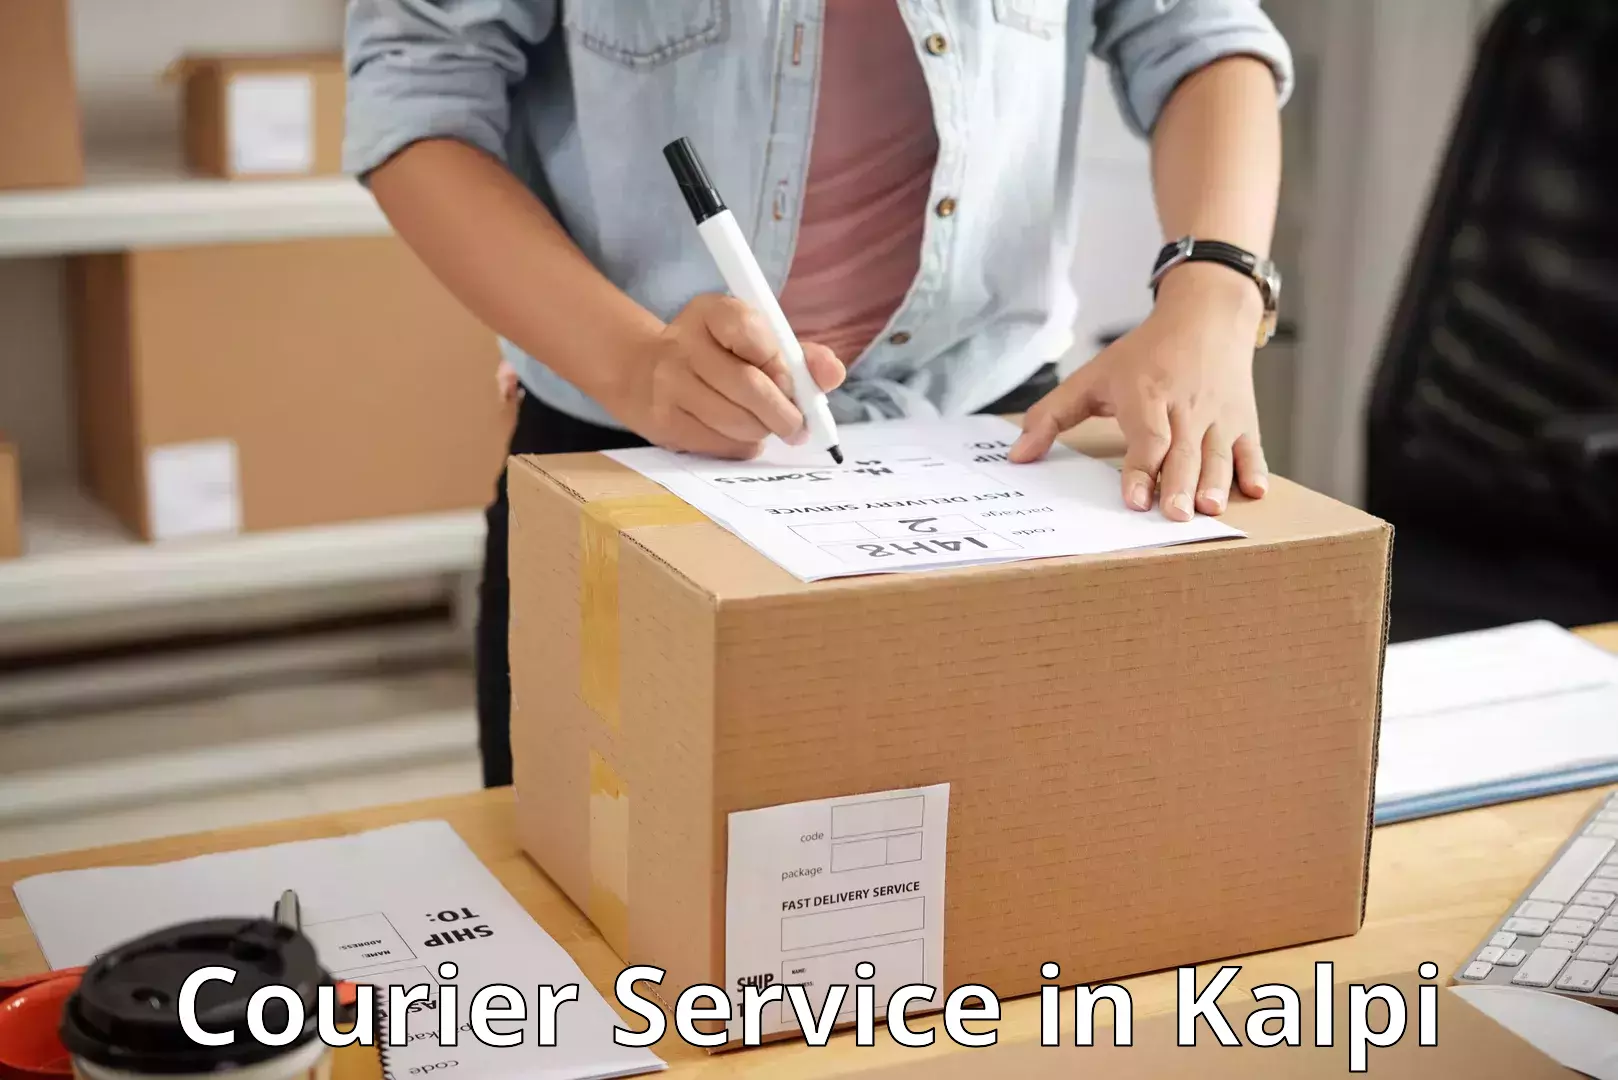 High-capacity shipping options in Kalpi